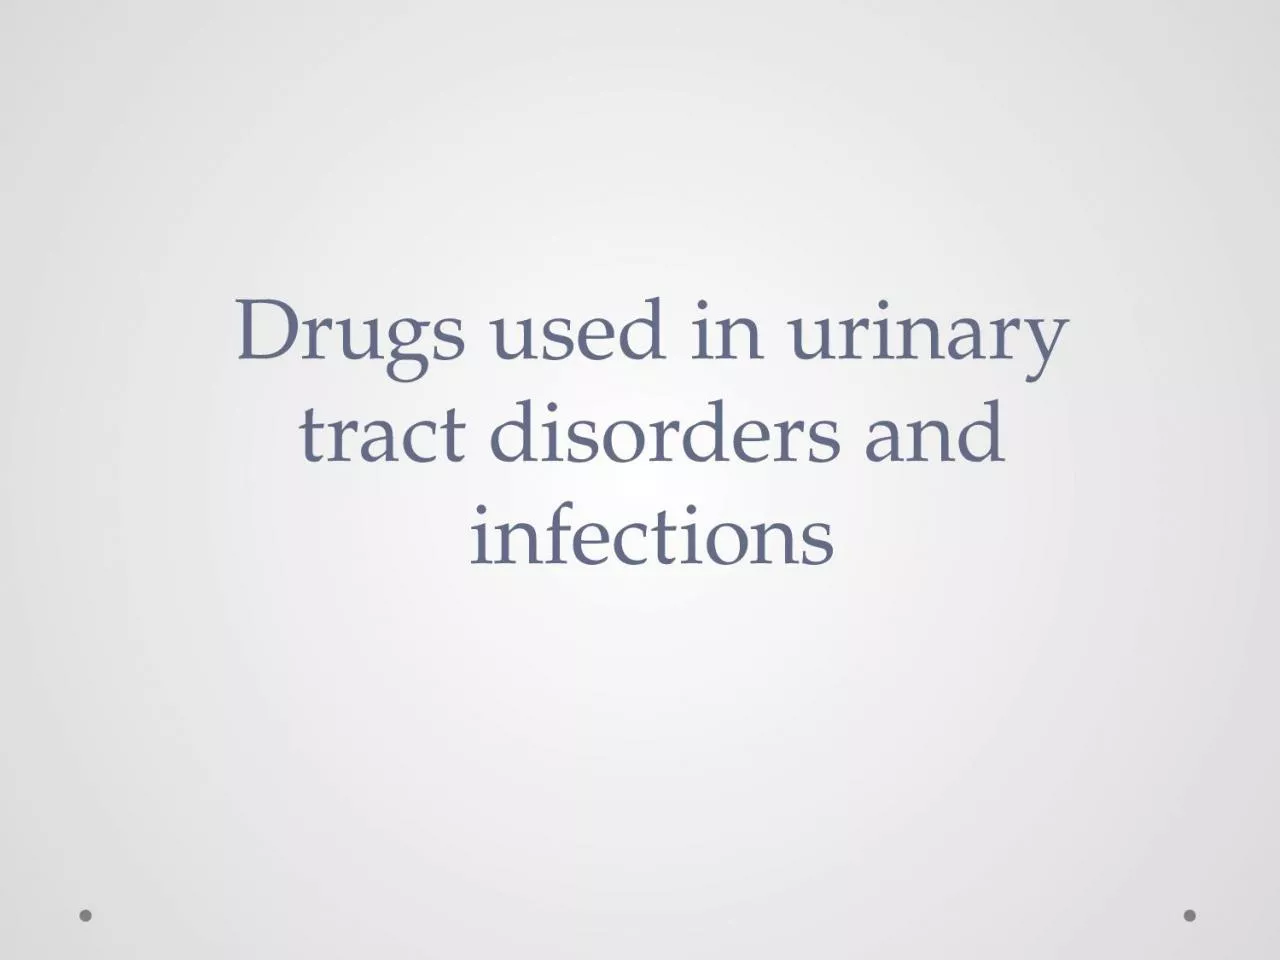 Drugs used in urinary tract disorders and infections